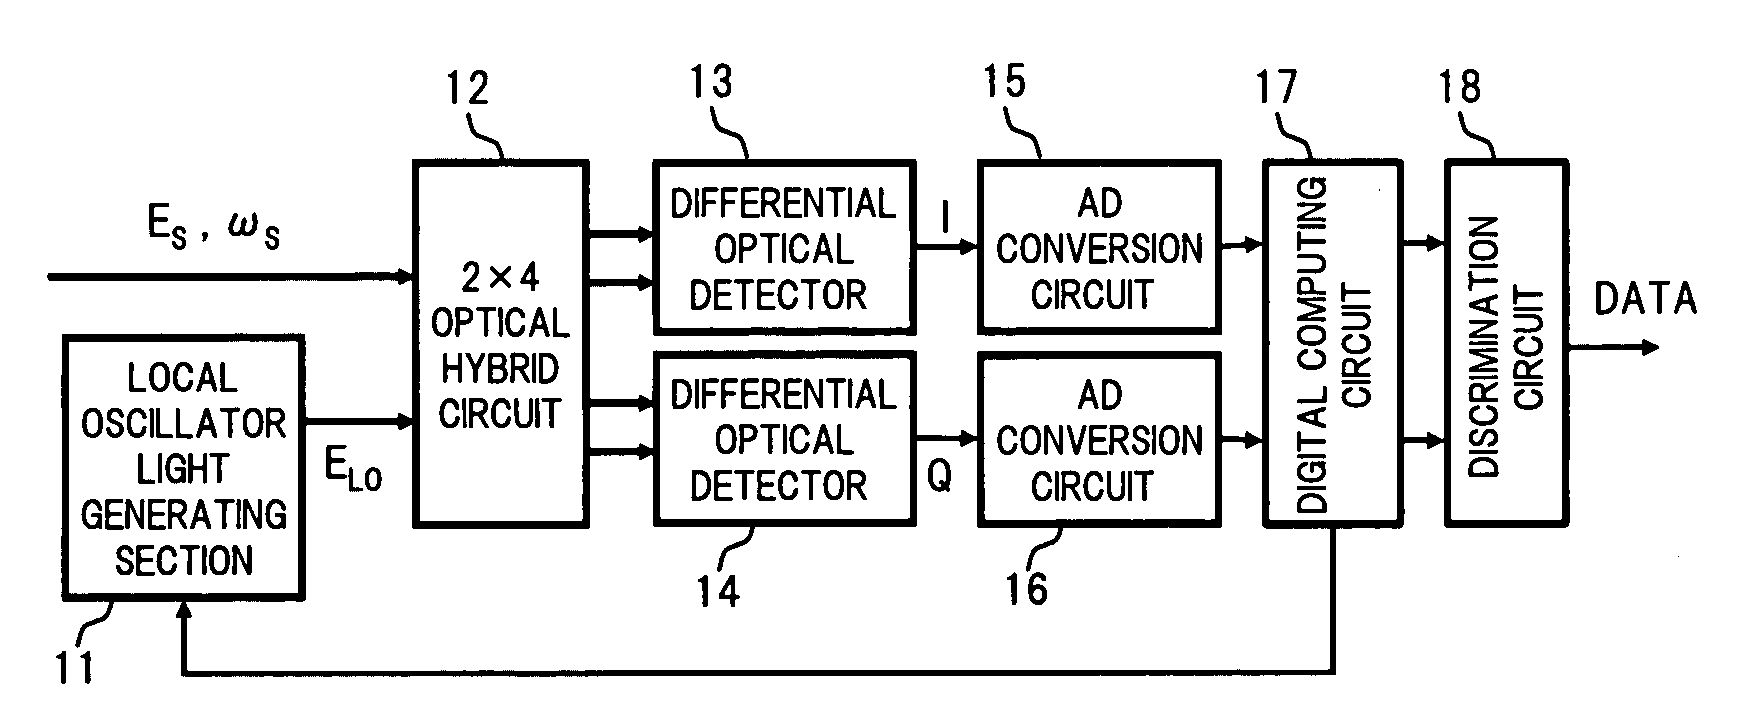 Coherent optical receiver